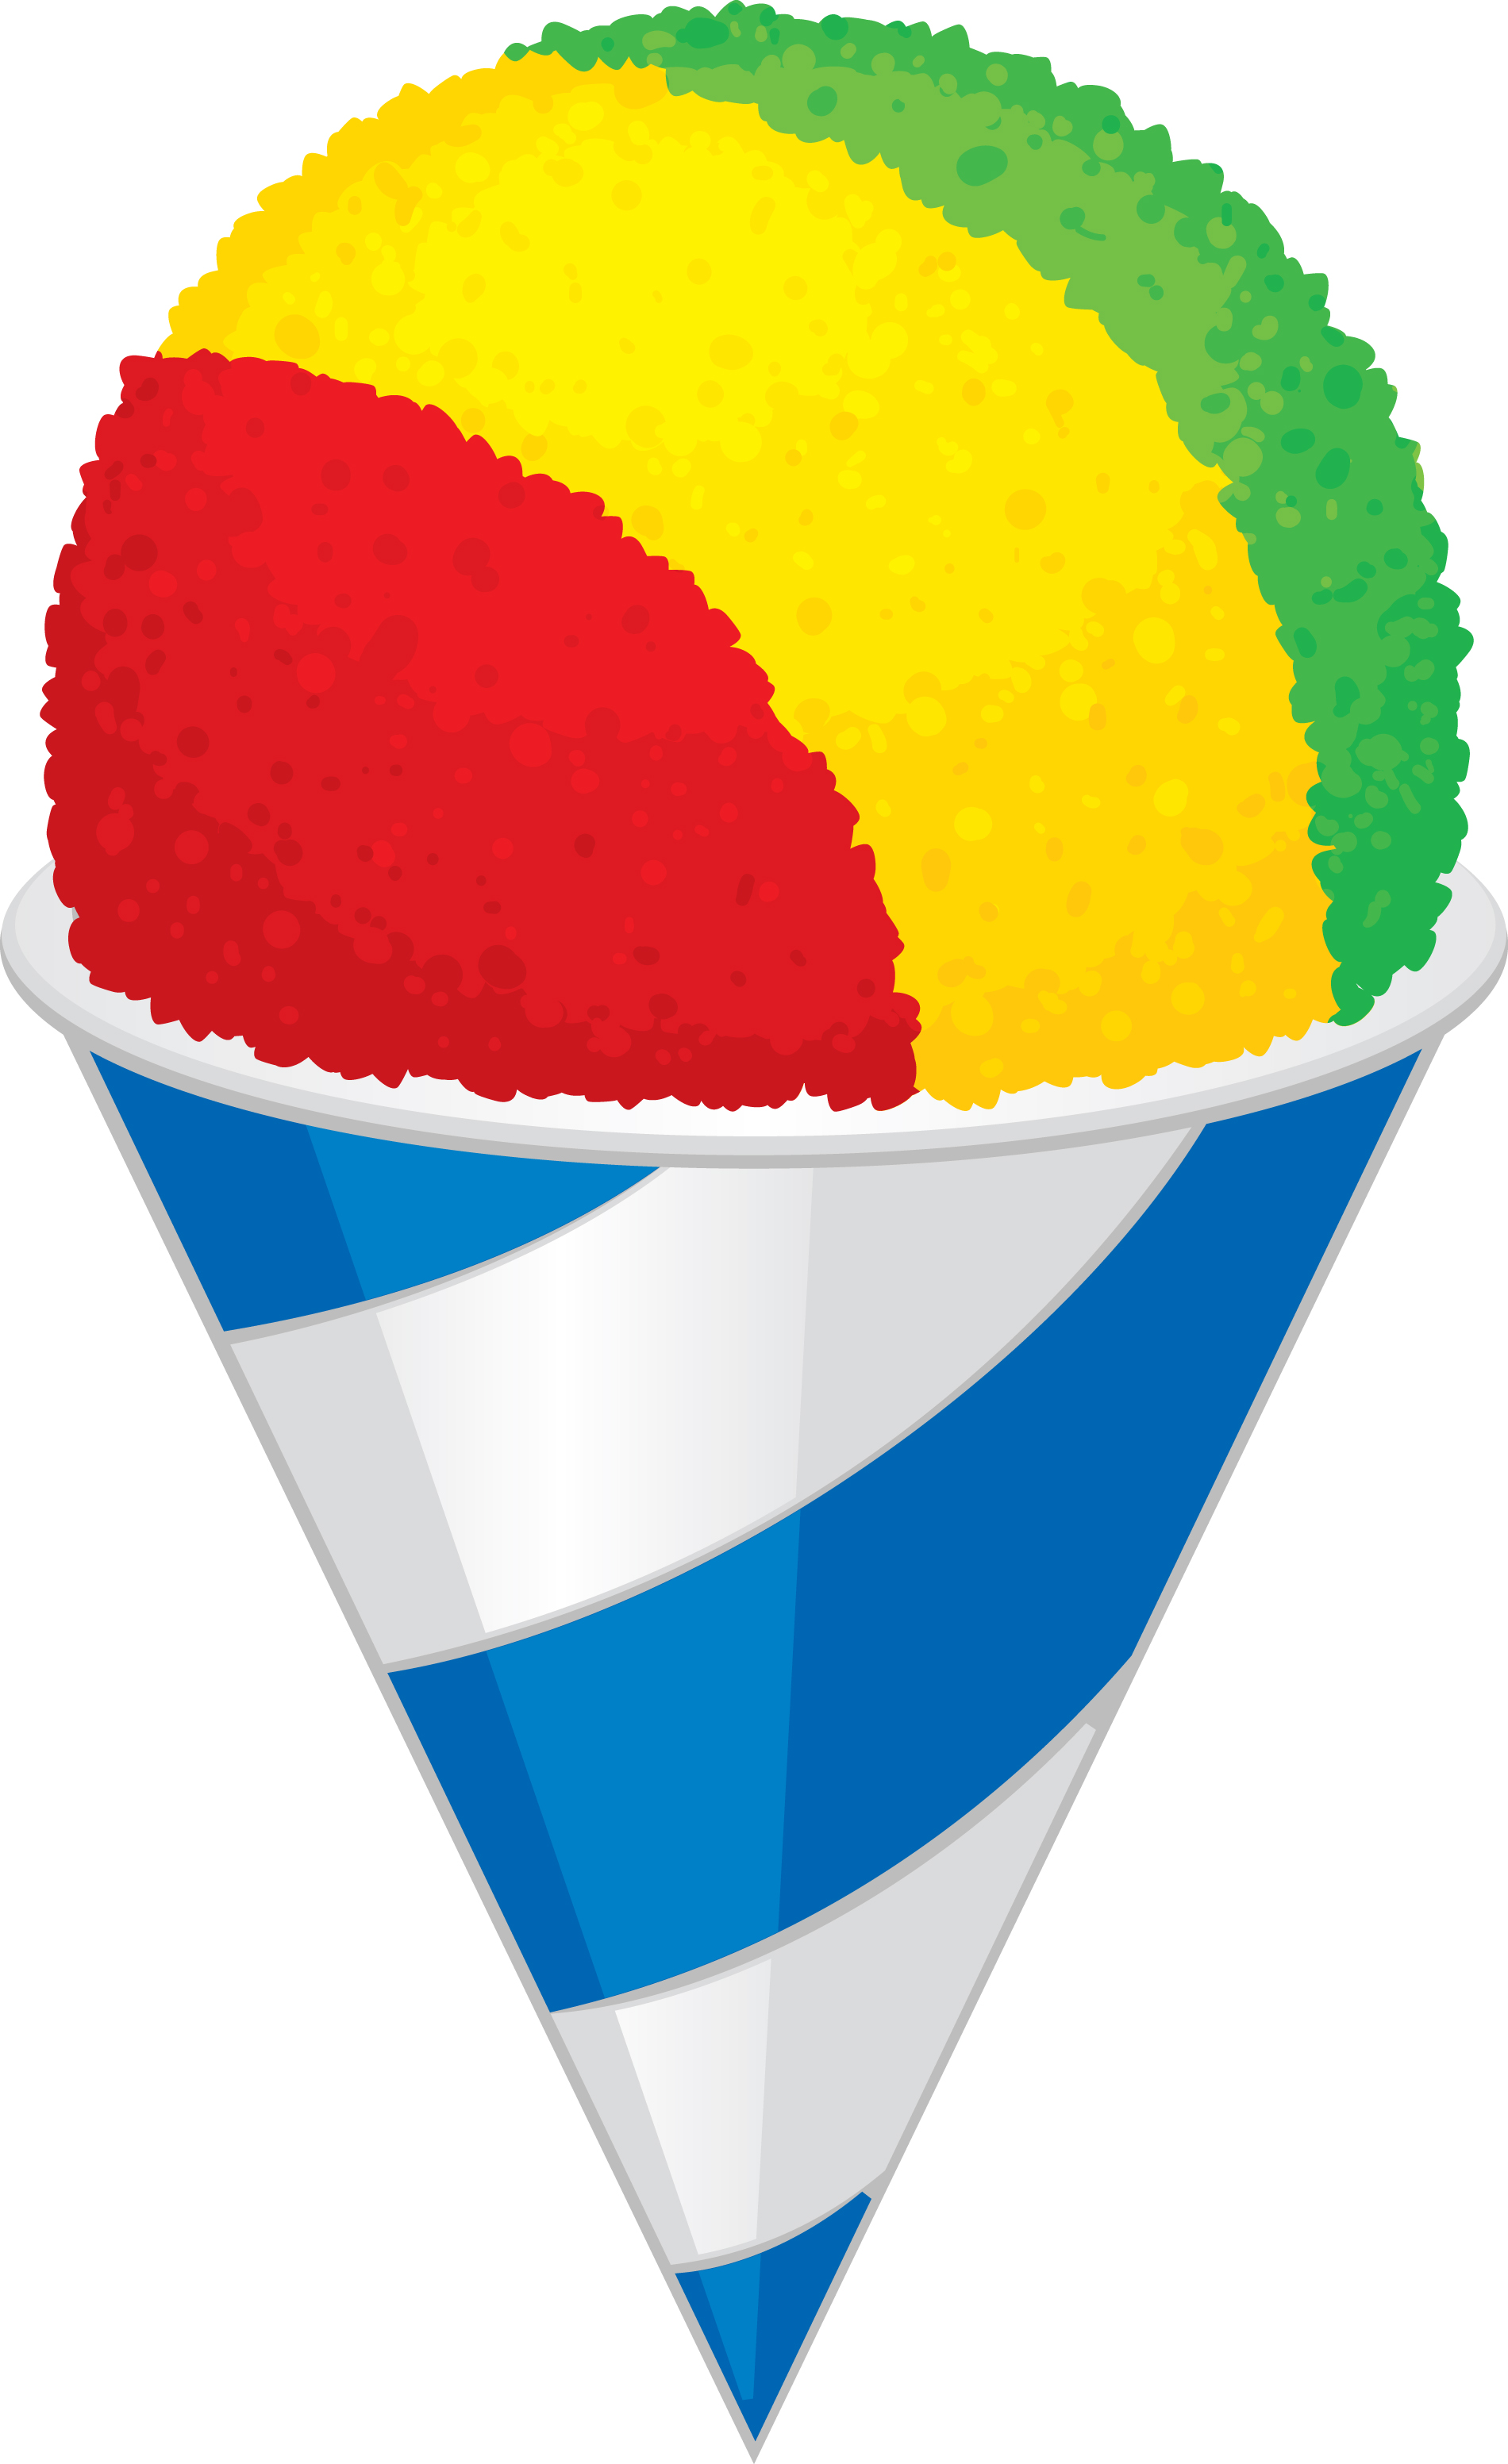 Rainbow Snow Cone Clipart - Sno Cone, Transparent background PNG HD thumbnail